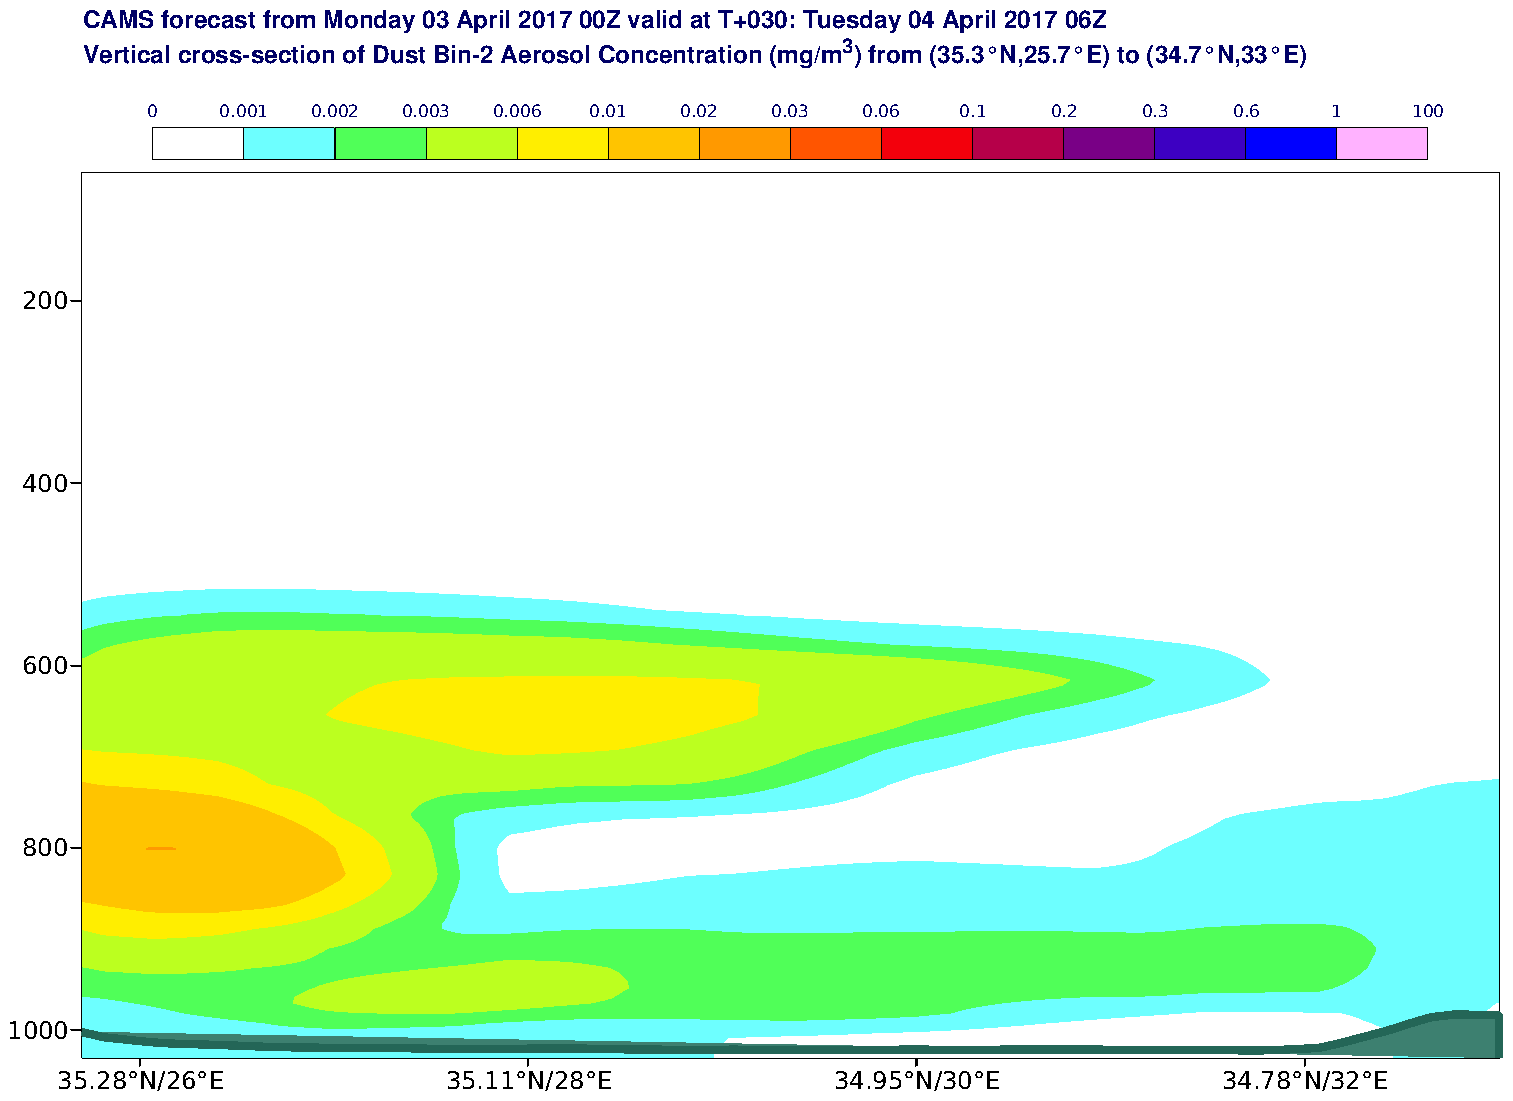 Vertical cross-section of Dust Bin-2 Aerosol Concentration (mg/m3) valid at T30 - 2017-04-04 06:00